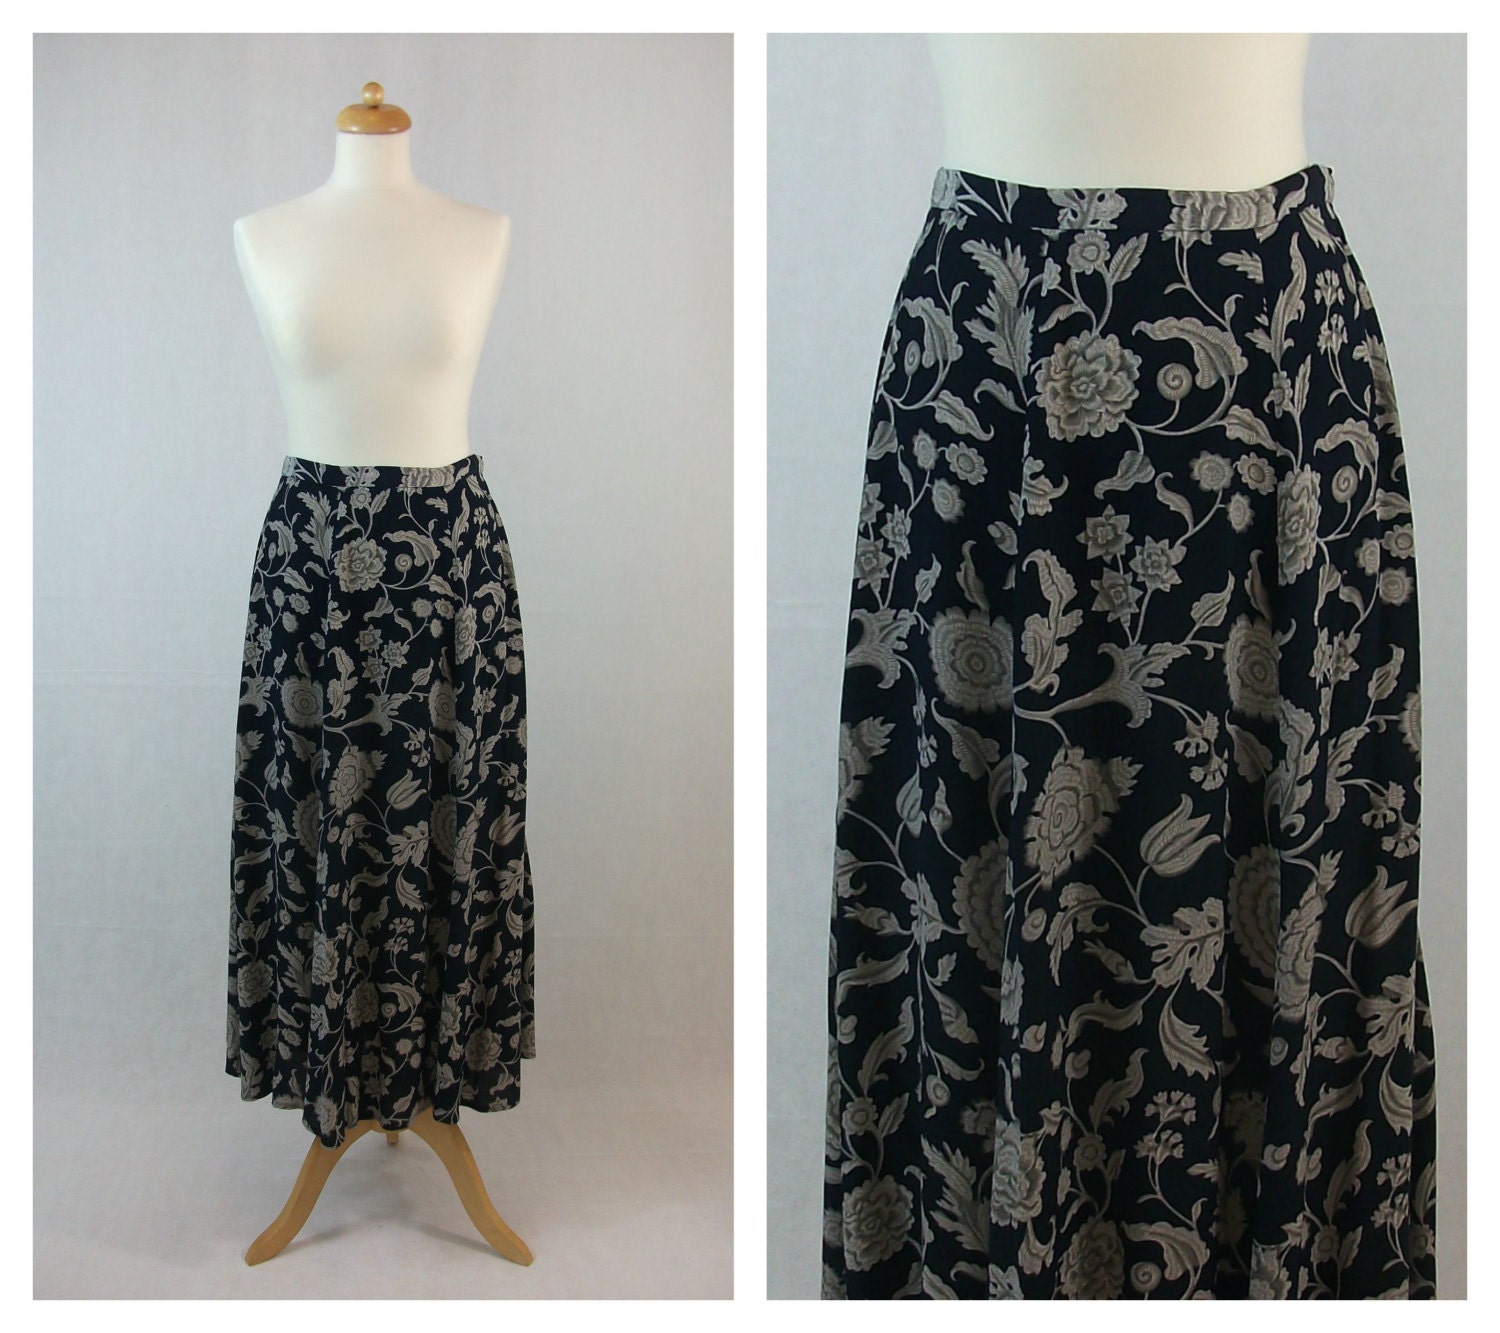 Midi skirt vintage navy blue and floral print. JH | Etsy